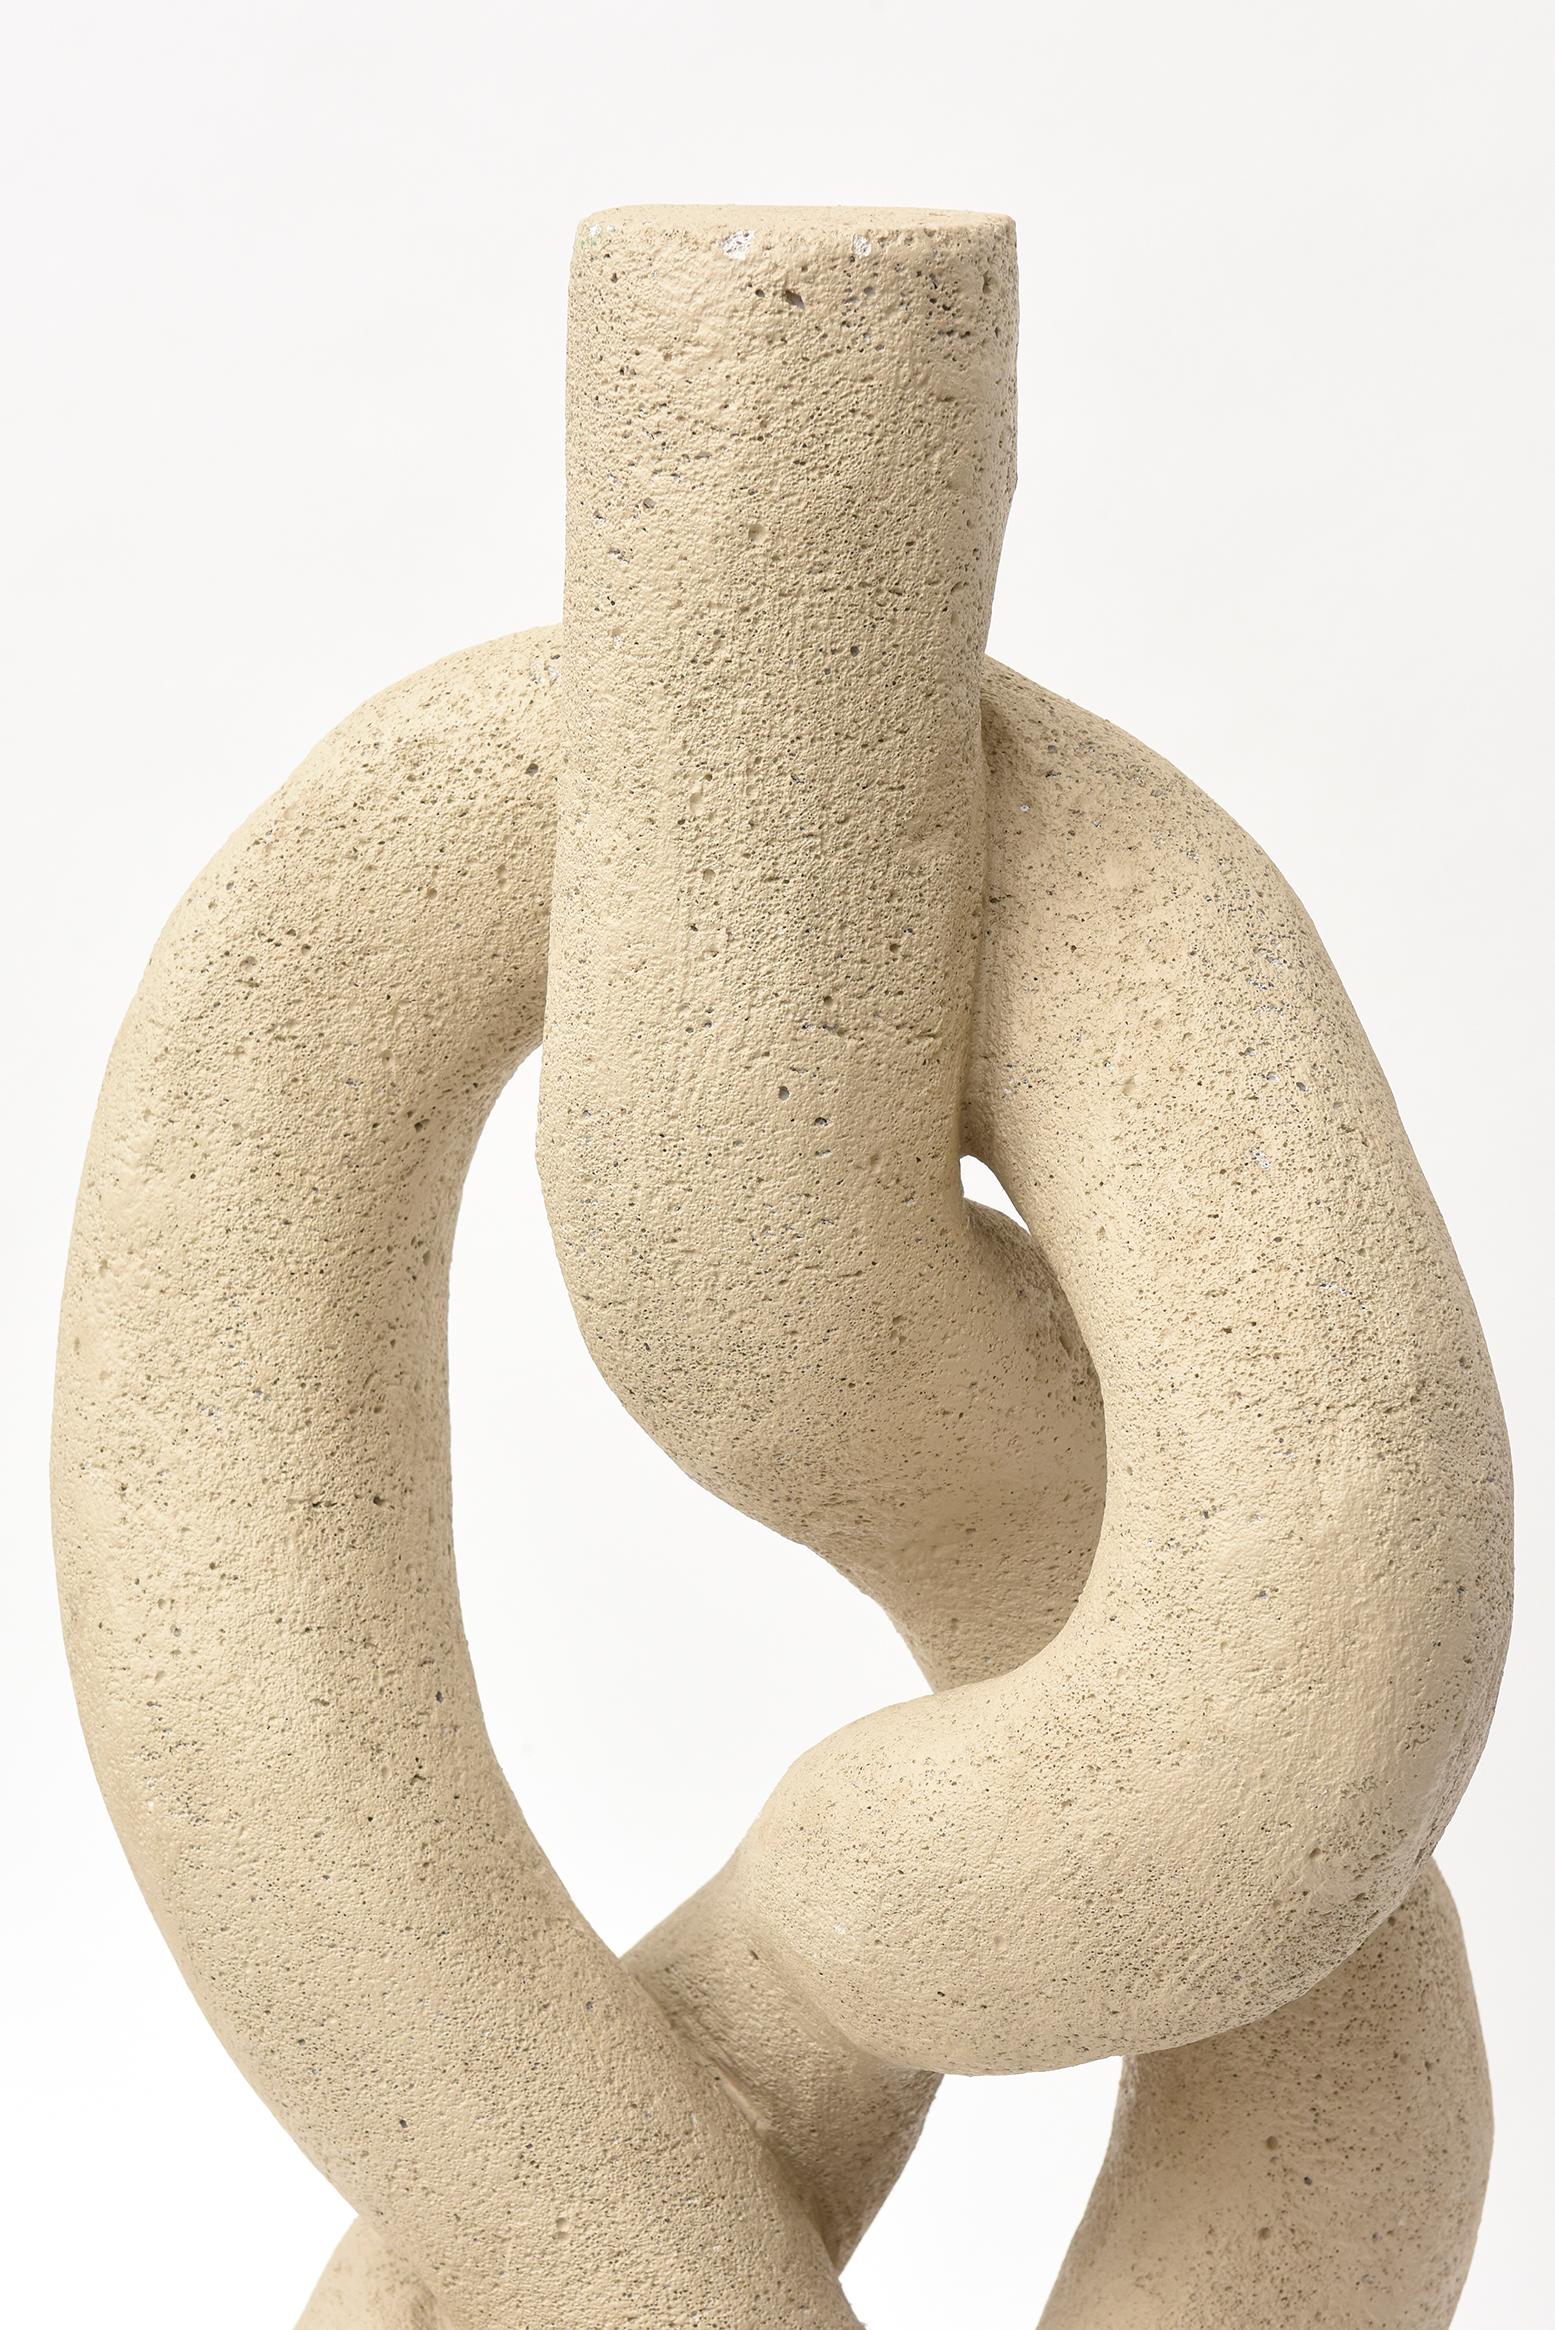 Late 20th Century Organic Modern Twisted Intertwined Composition Sculpture